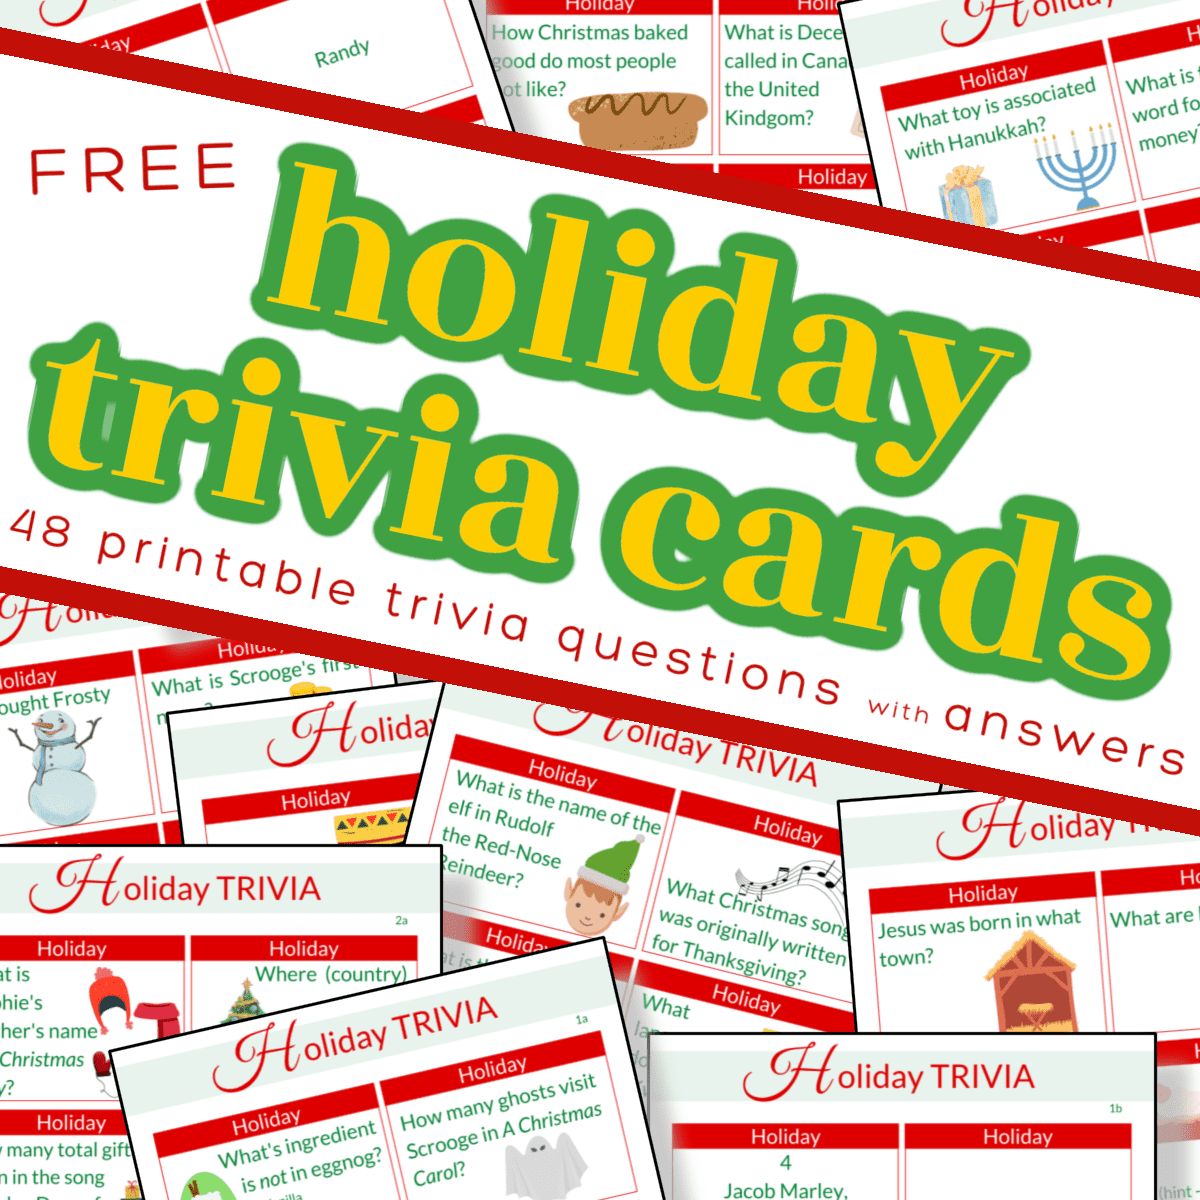 scattered pages of printable holiday trivia cards with text overlay saying "holiday trivia cards".